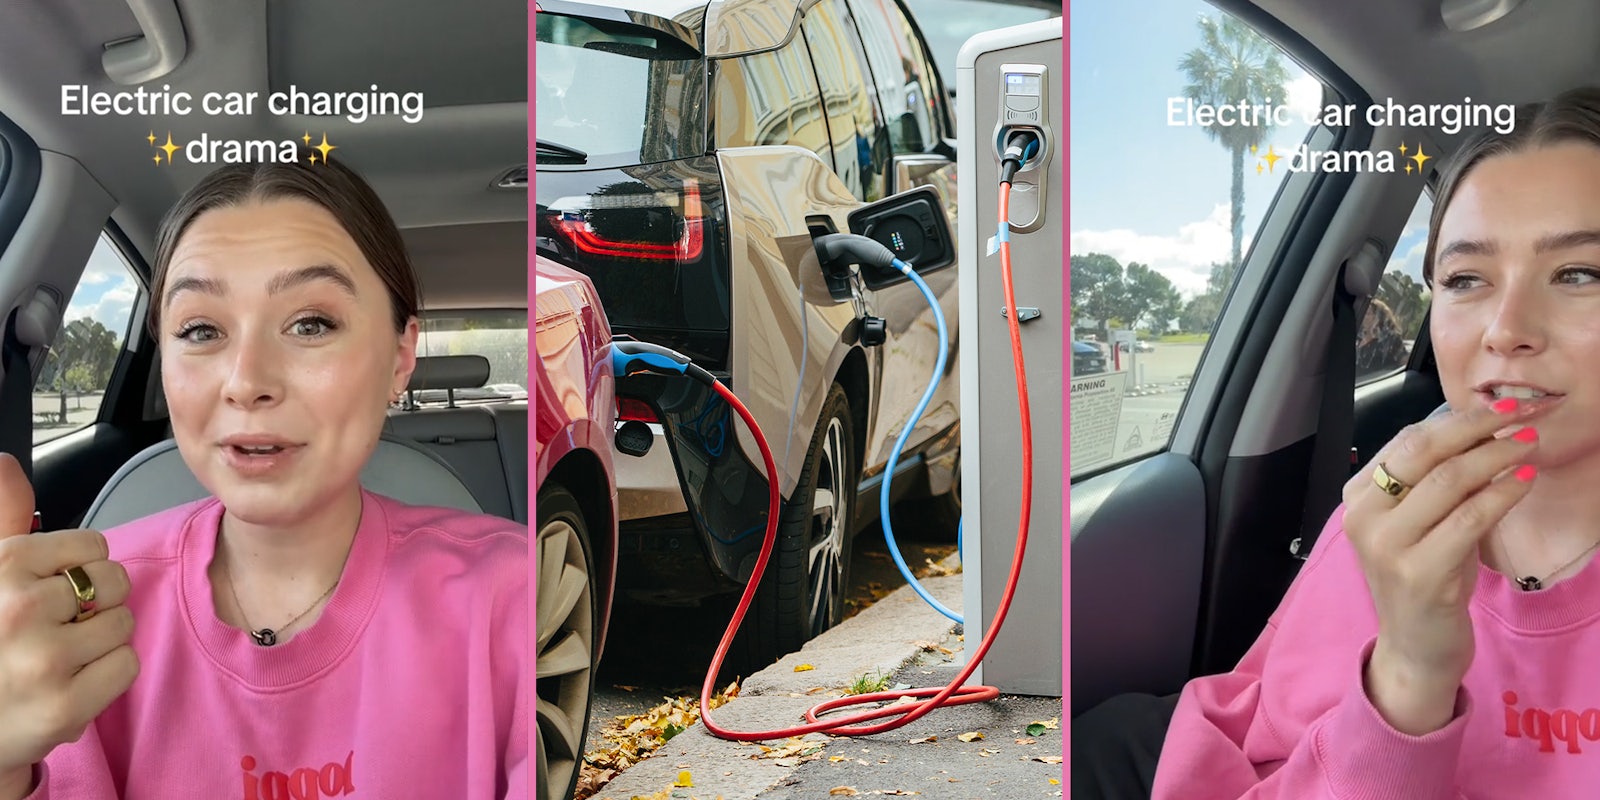 Electric car owner says she had to wait over an hour to charge her car